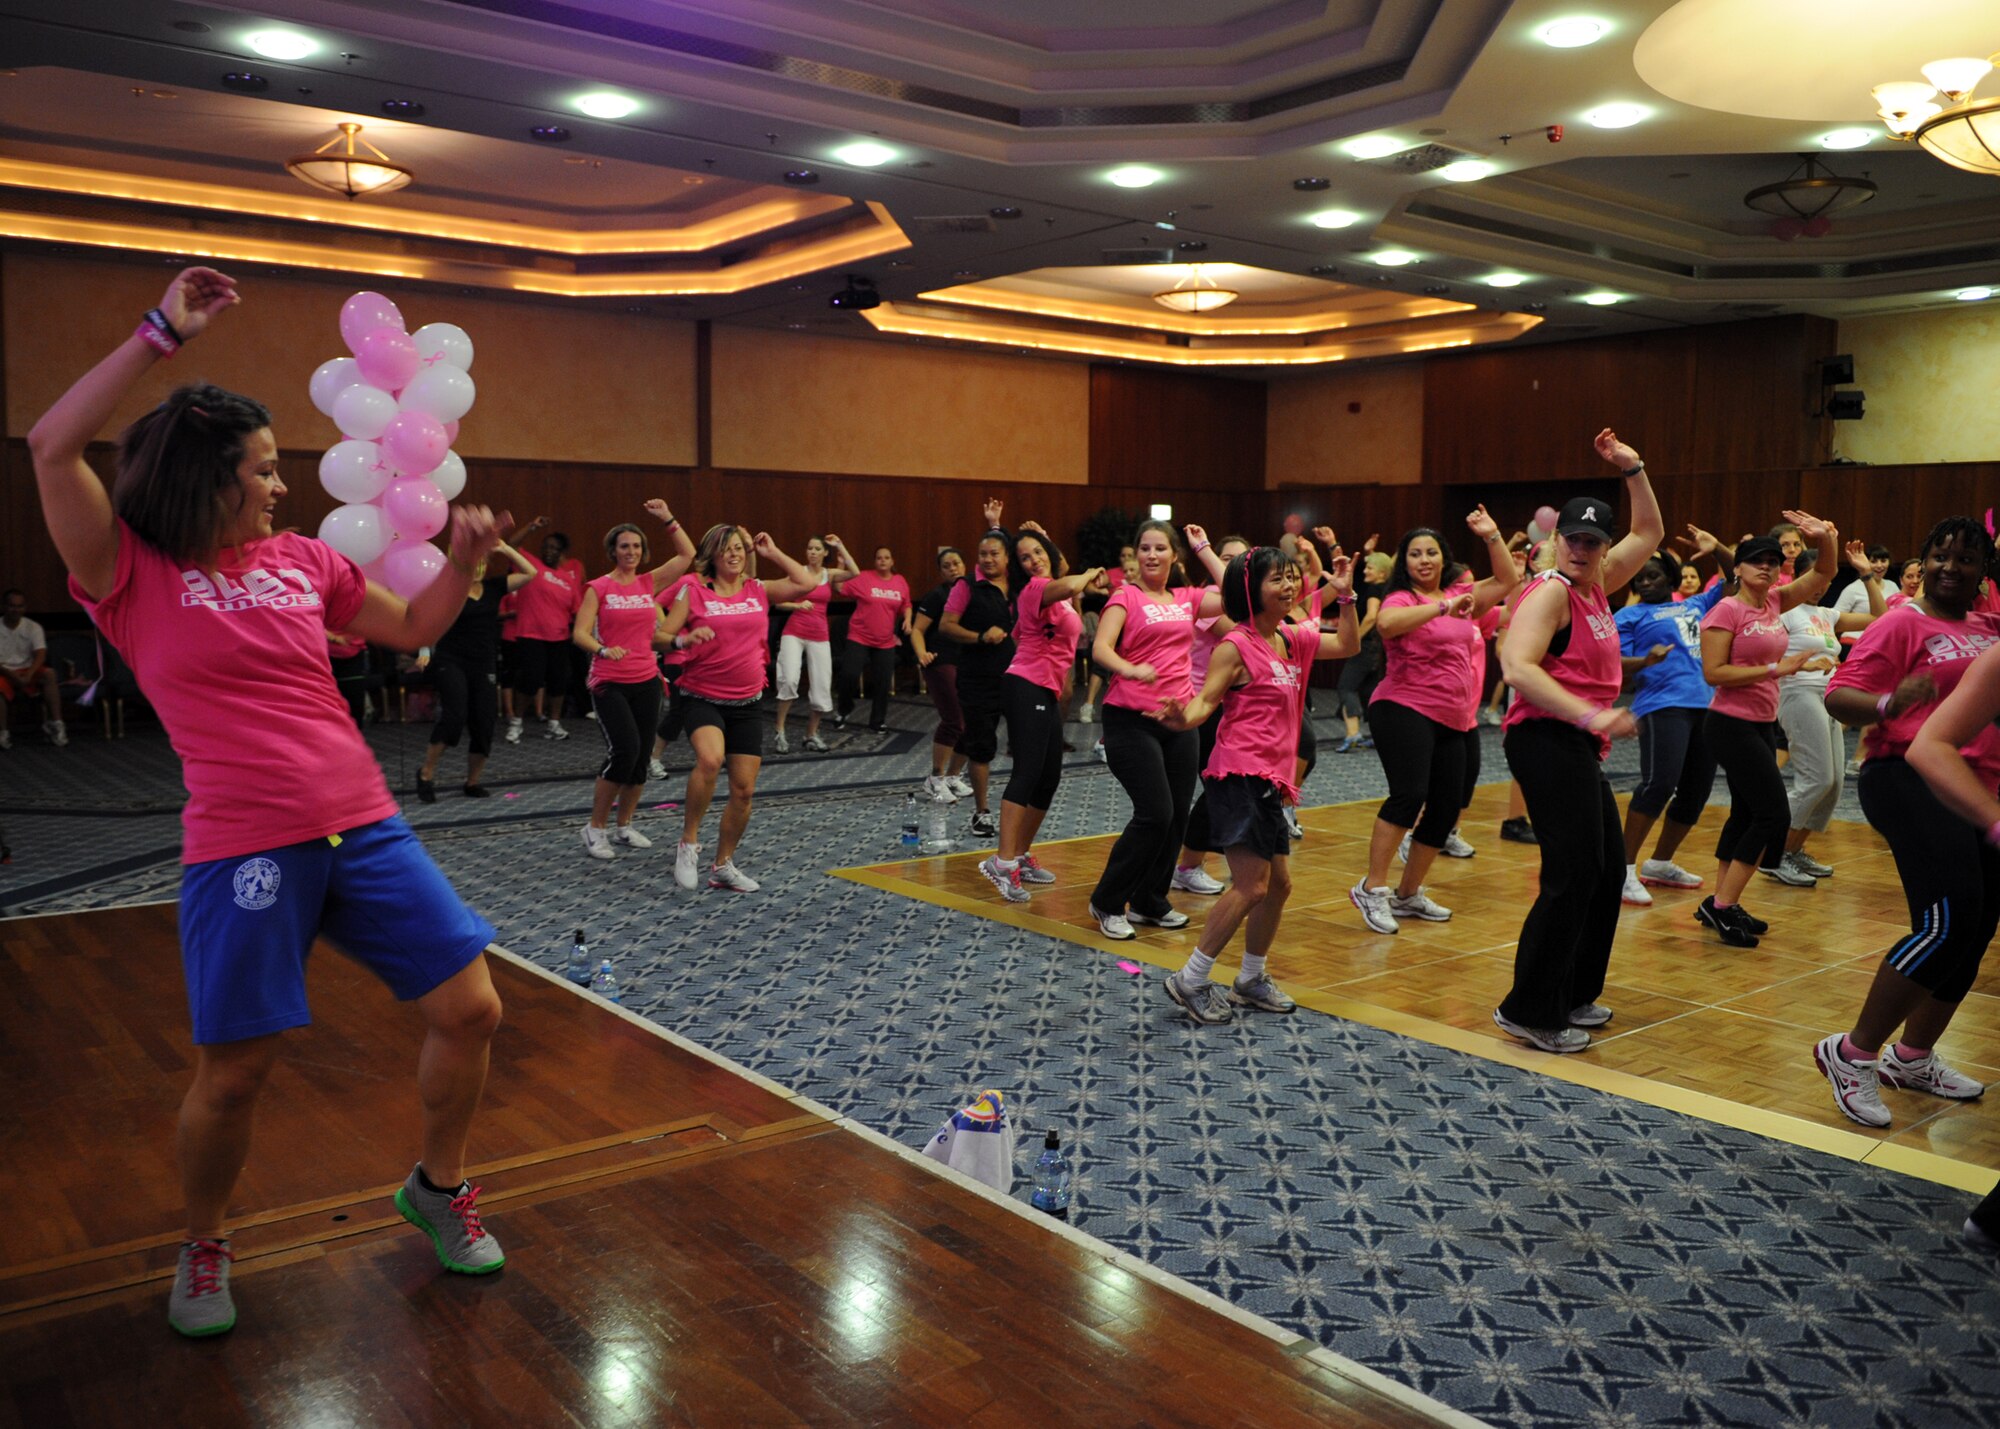 SPANGDAHLEM AIR BASE, Germany – Fiona Cook, wife of Master Sgt. Teddy Cook, 372 Training Squadron Detachment 17, leads the more than 130 participants during a dance at the Zumba for a Cure event in support of Breast Cancer Awareness Month here Oct. 13. Zumba for a Cure raised more than $2,000 toward the Susan G. Komen Foundation for Breast Cancer Research. (U.S. Air Force photo/Senior Airman Christopher Toon)